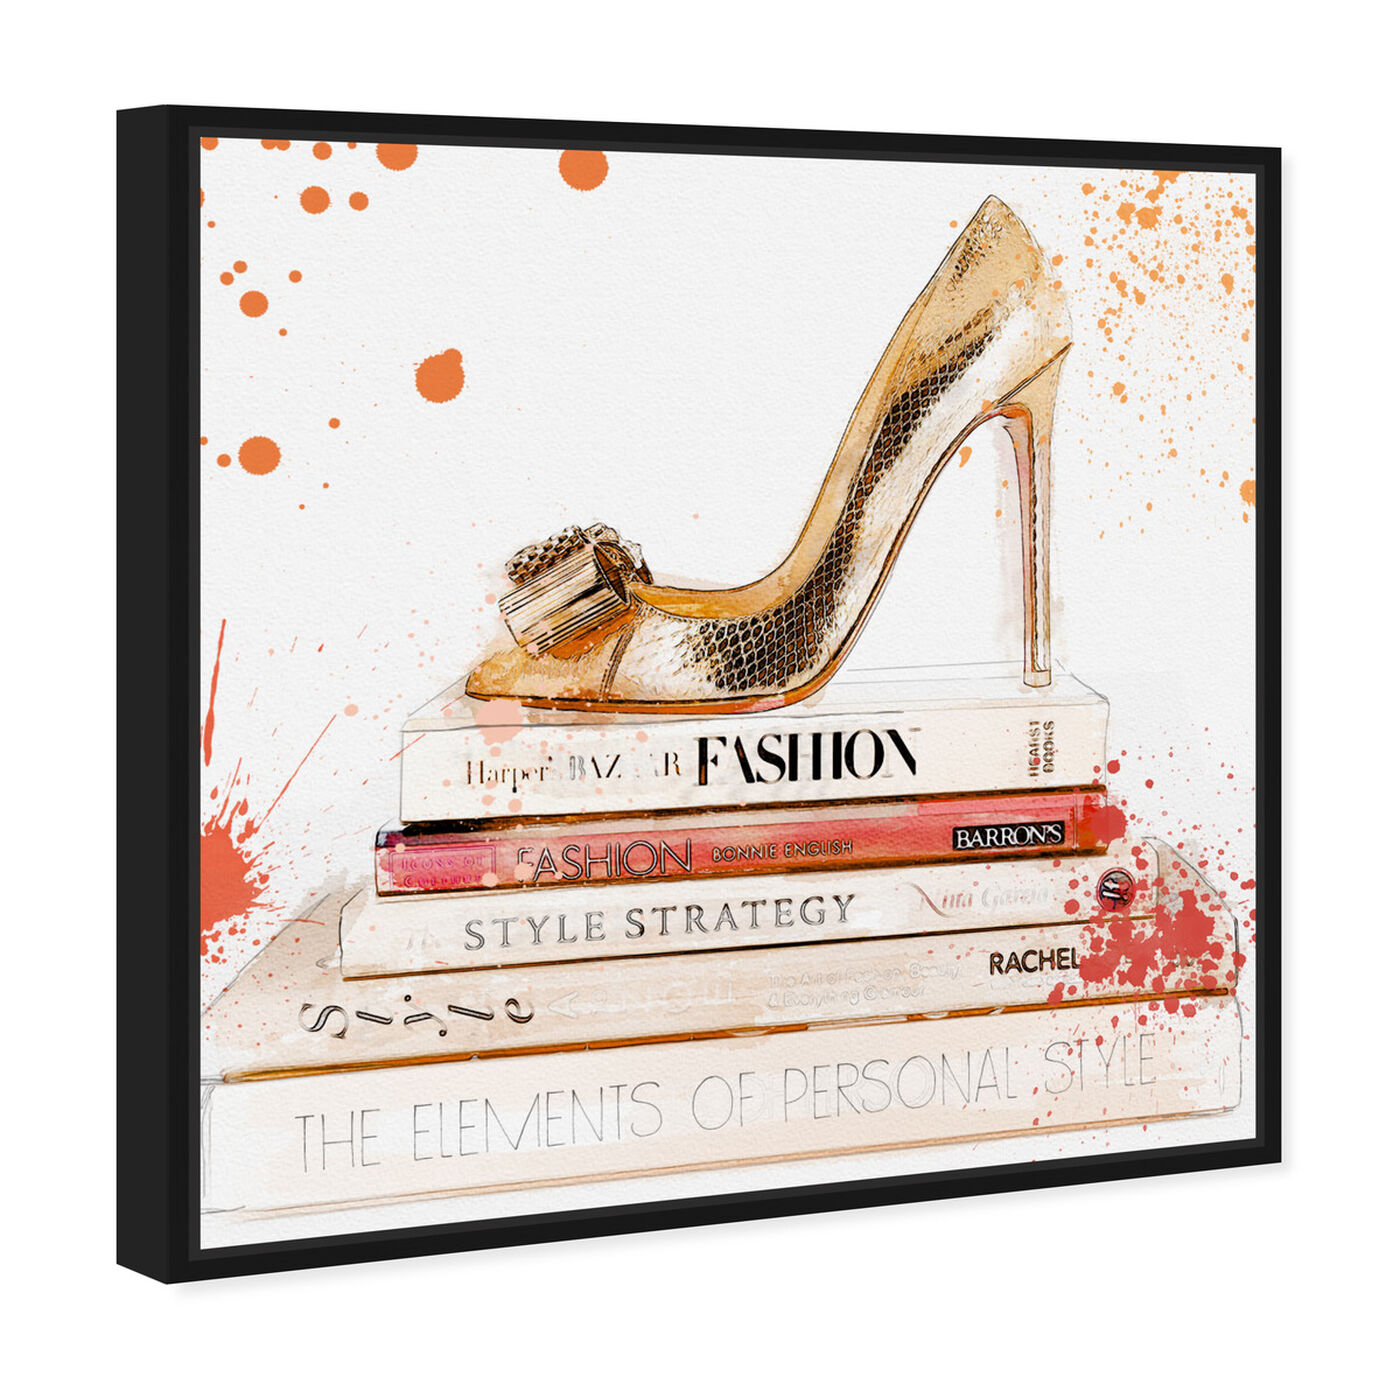 Angled view of Coral Shoe and Books featuring fashion and glam and shoes art.